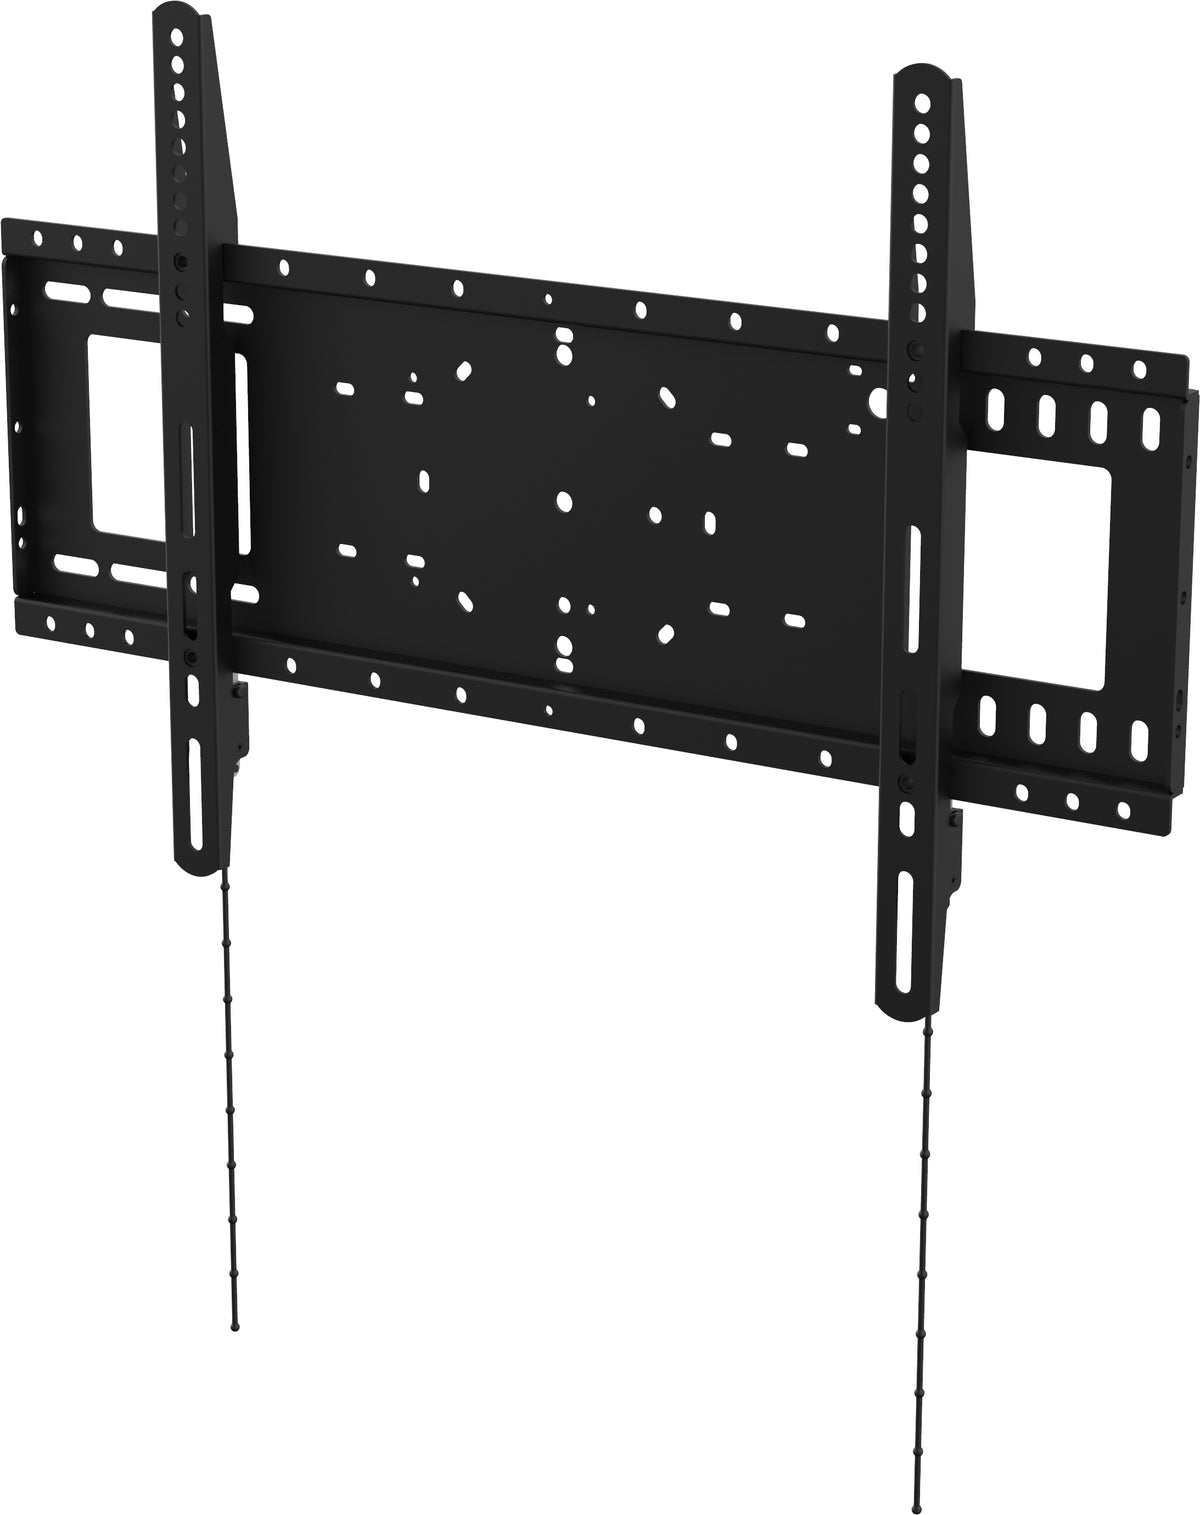 VISION Heavy Duty Display Wall Mount - LIFETIME WARRANTY - fits display 37-85" with VESA sizes up to 600 x 400 - non-tilting - suits interactive flat panels or LED TVs - arms latch securely - cold-rolled steel - media player fixing points - SWL 100k